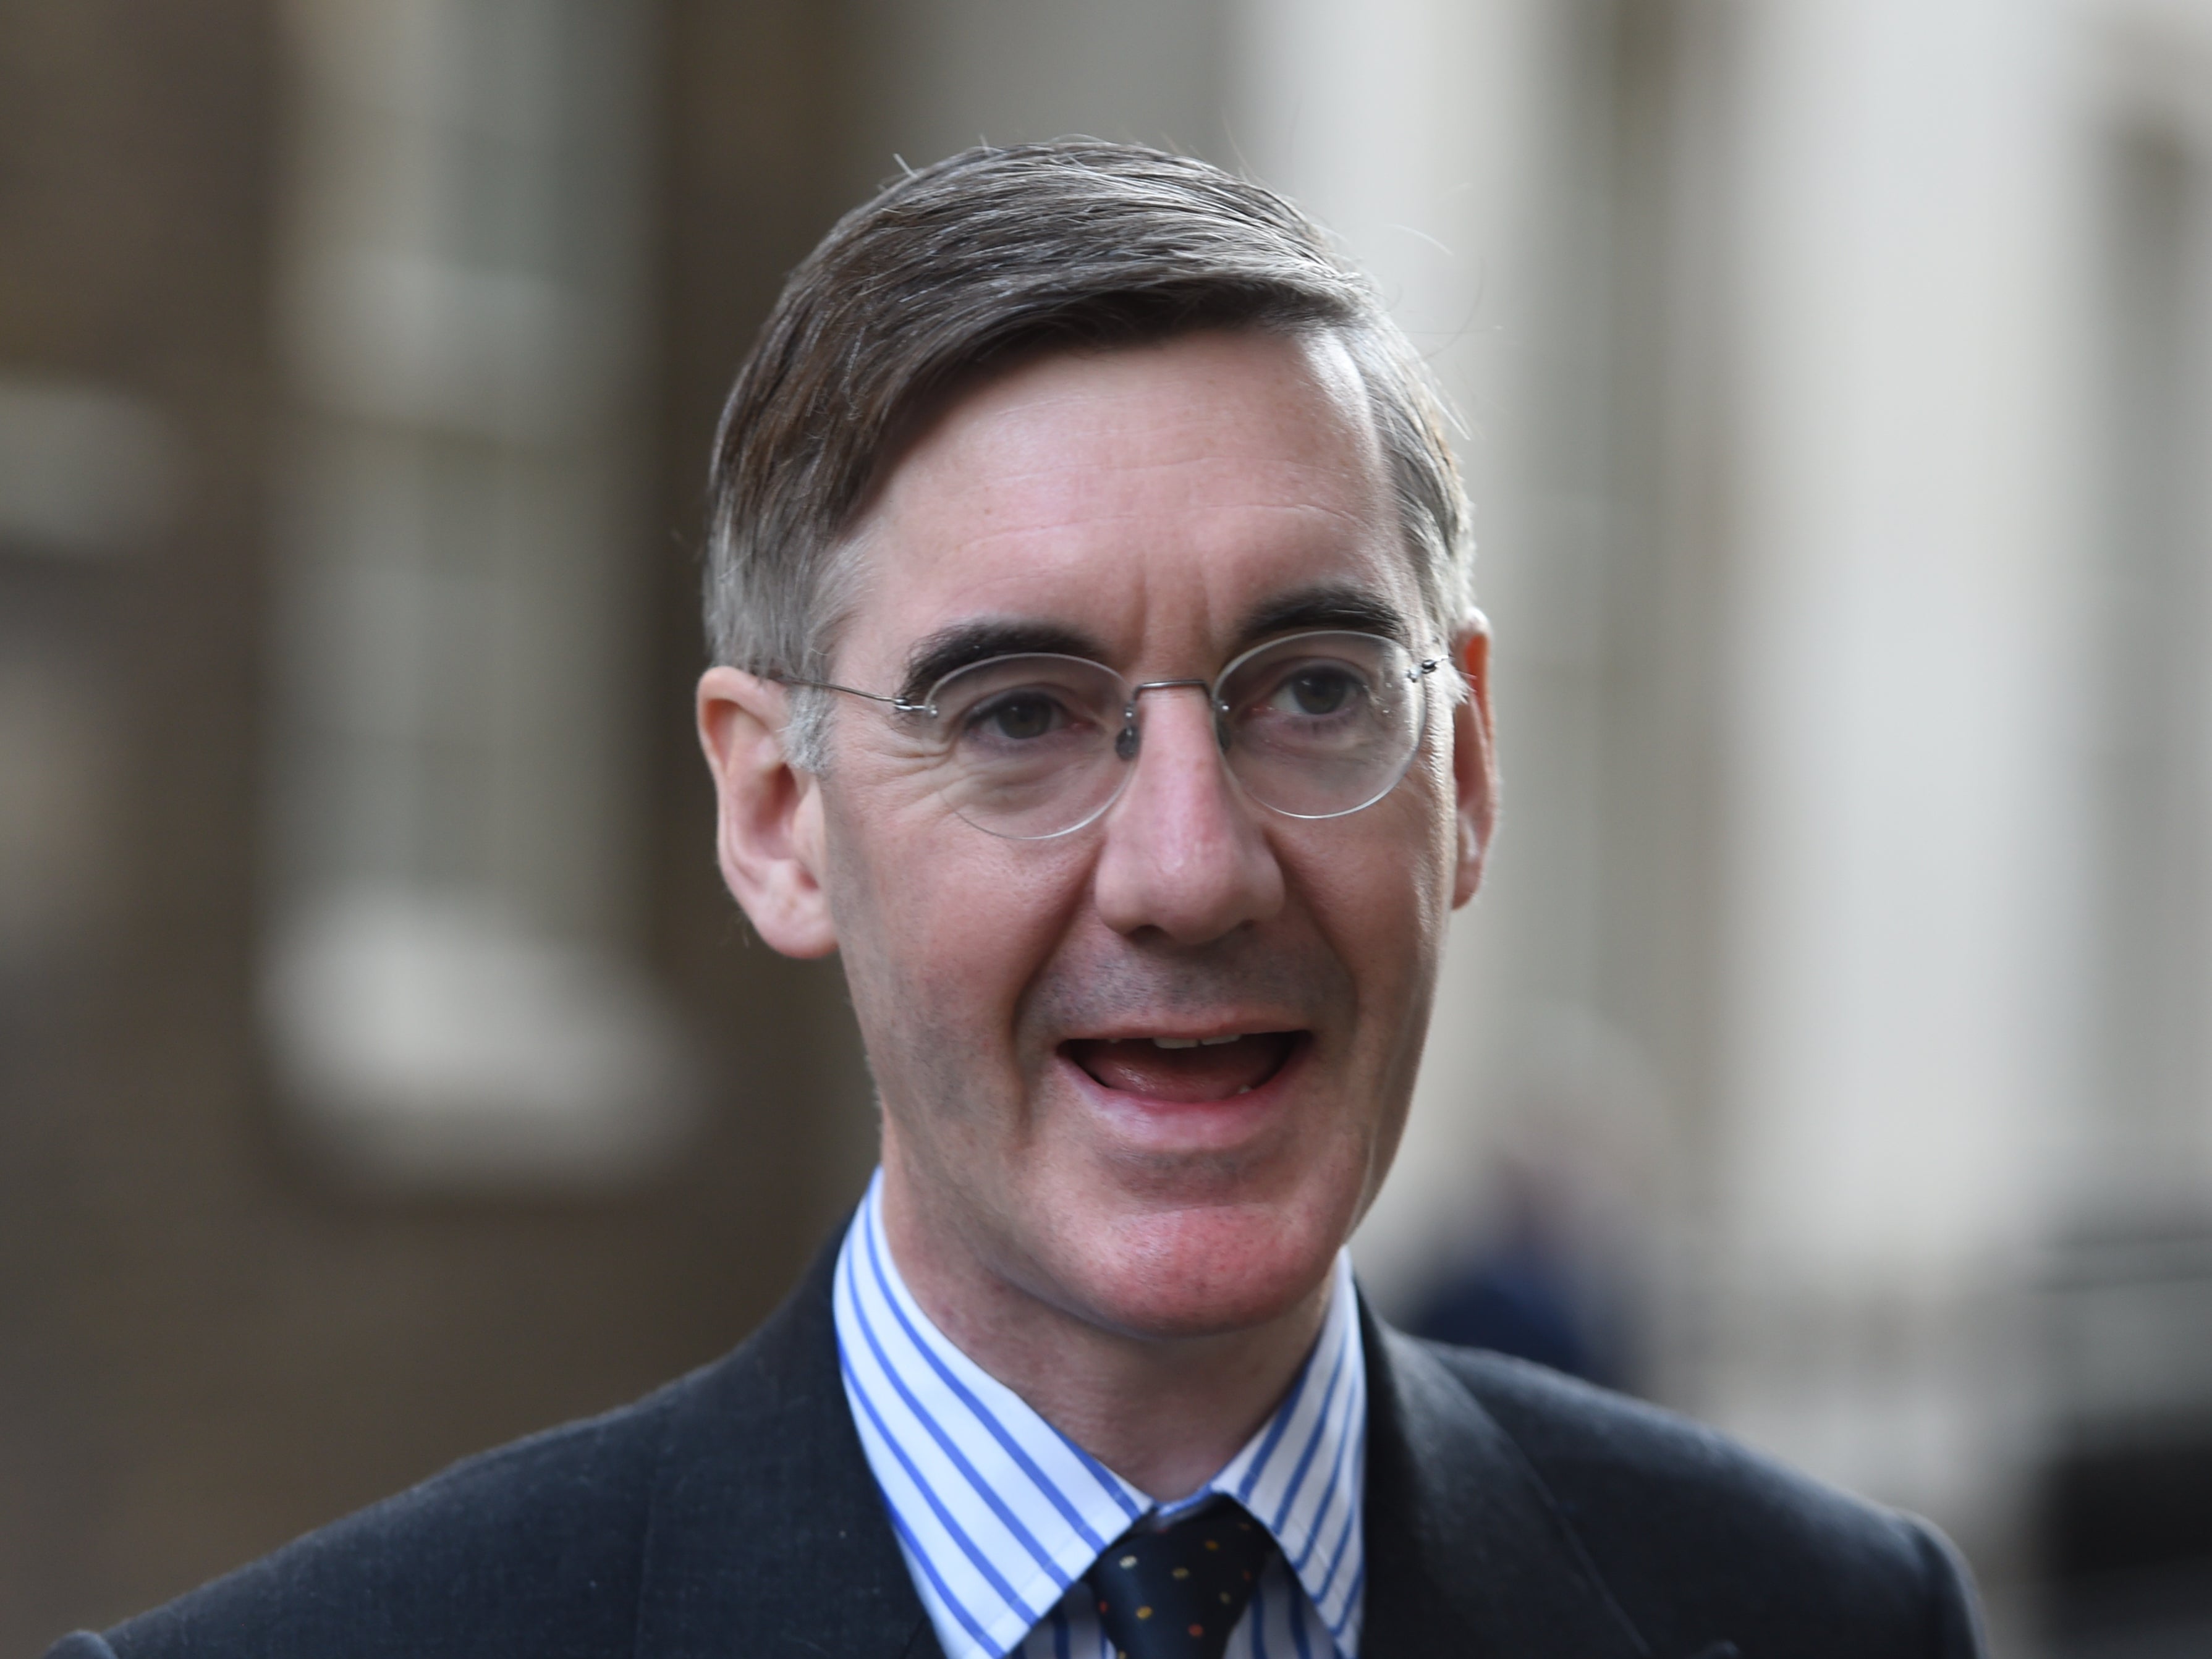 Leader of the Commons Jacob Rees-Mogg